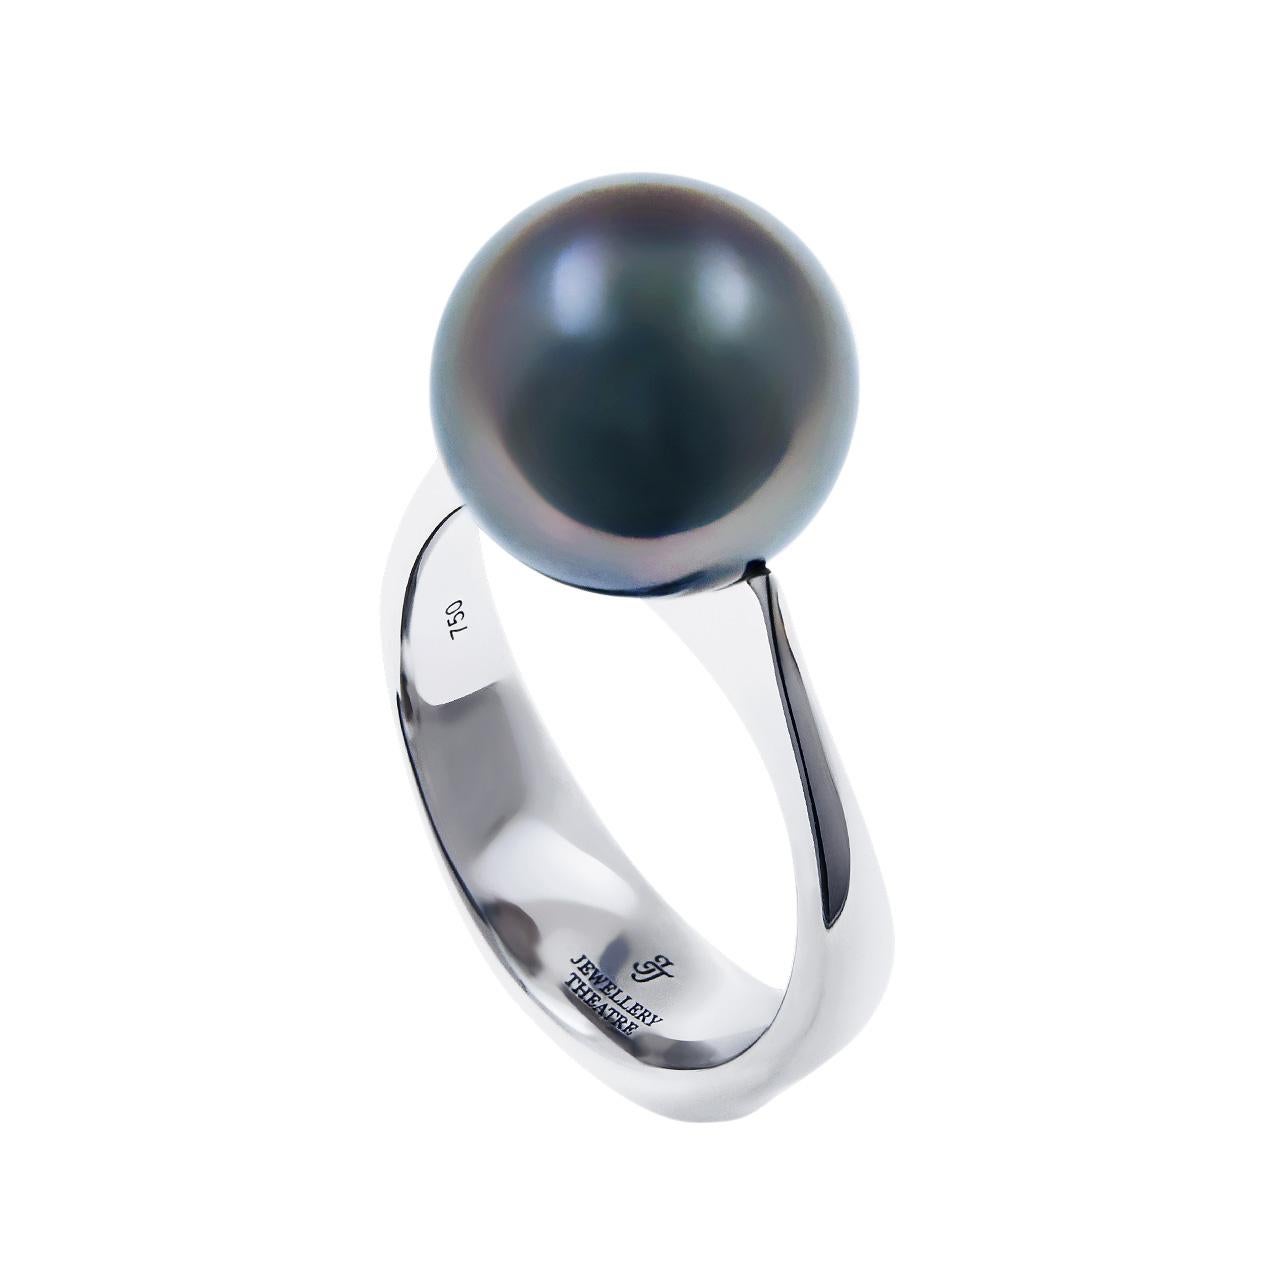 -28 Round Diamonds - 0.10 ct, G/VVS1-VVS2
- 10.5 mm Dark Tahitian pearl
- 18K White Gold 
- Weight: 5.44 g
- Size: 15.5 mm
This elegant ring by Jewellery Theatre features a lustrous dark Tahitian Pearl. Ring has a heel at the bottom decorated with